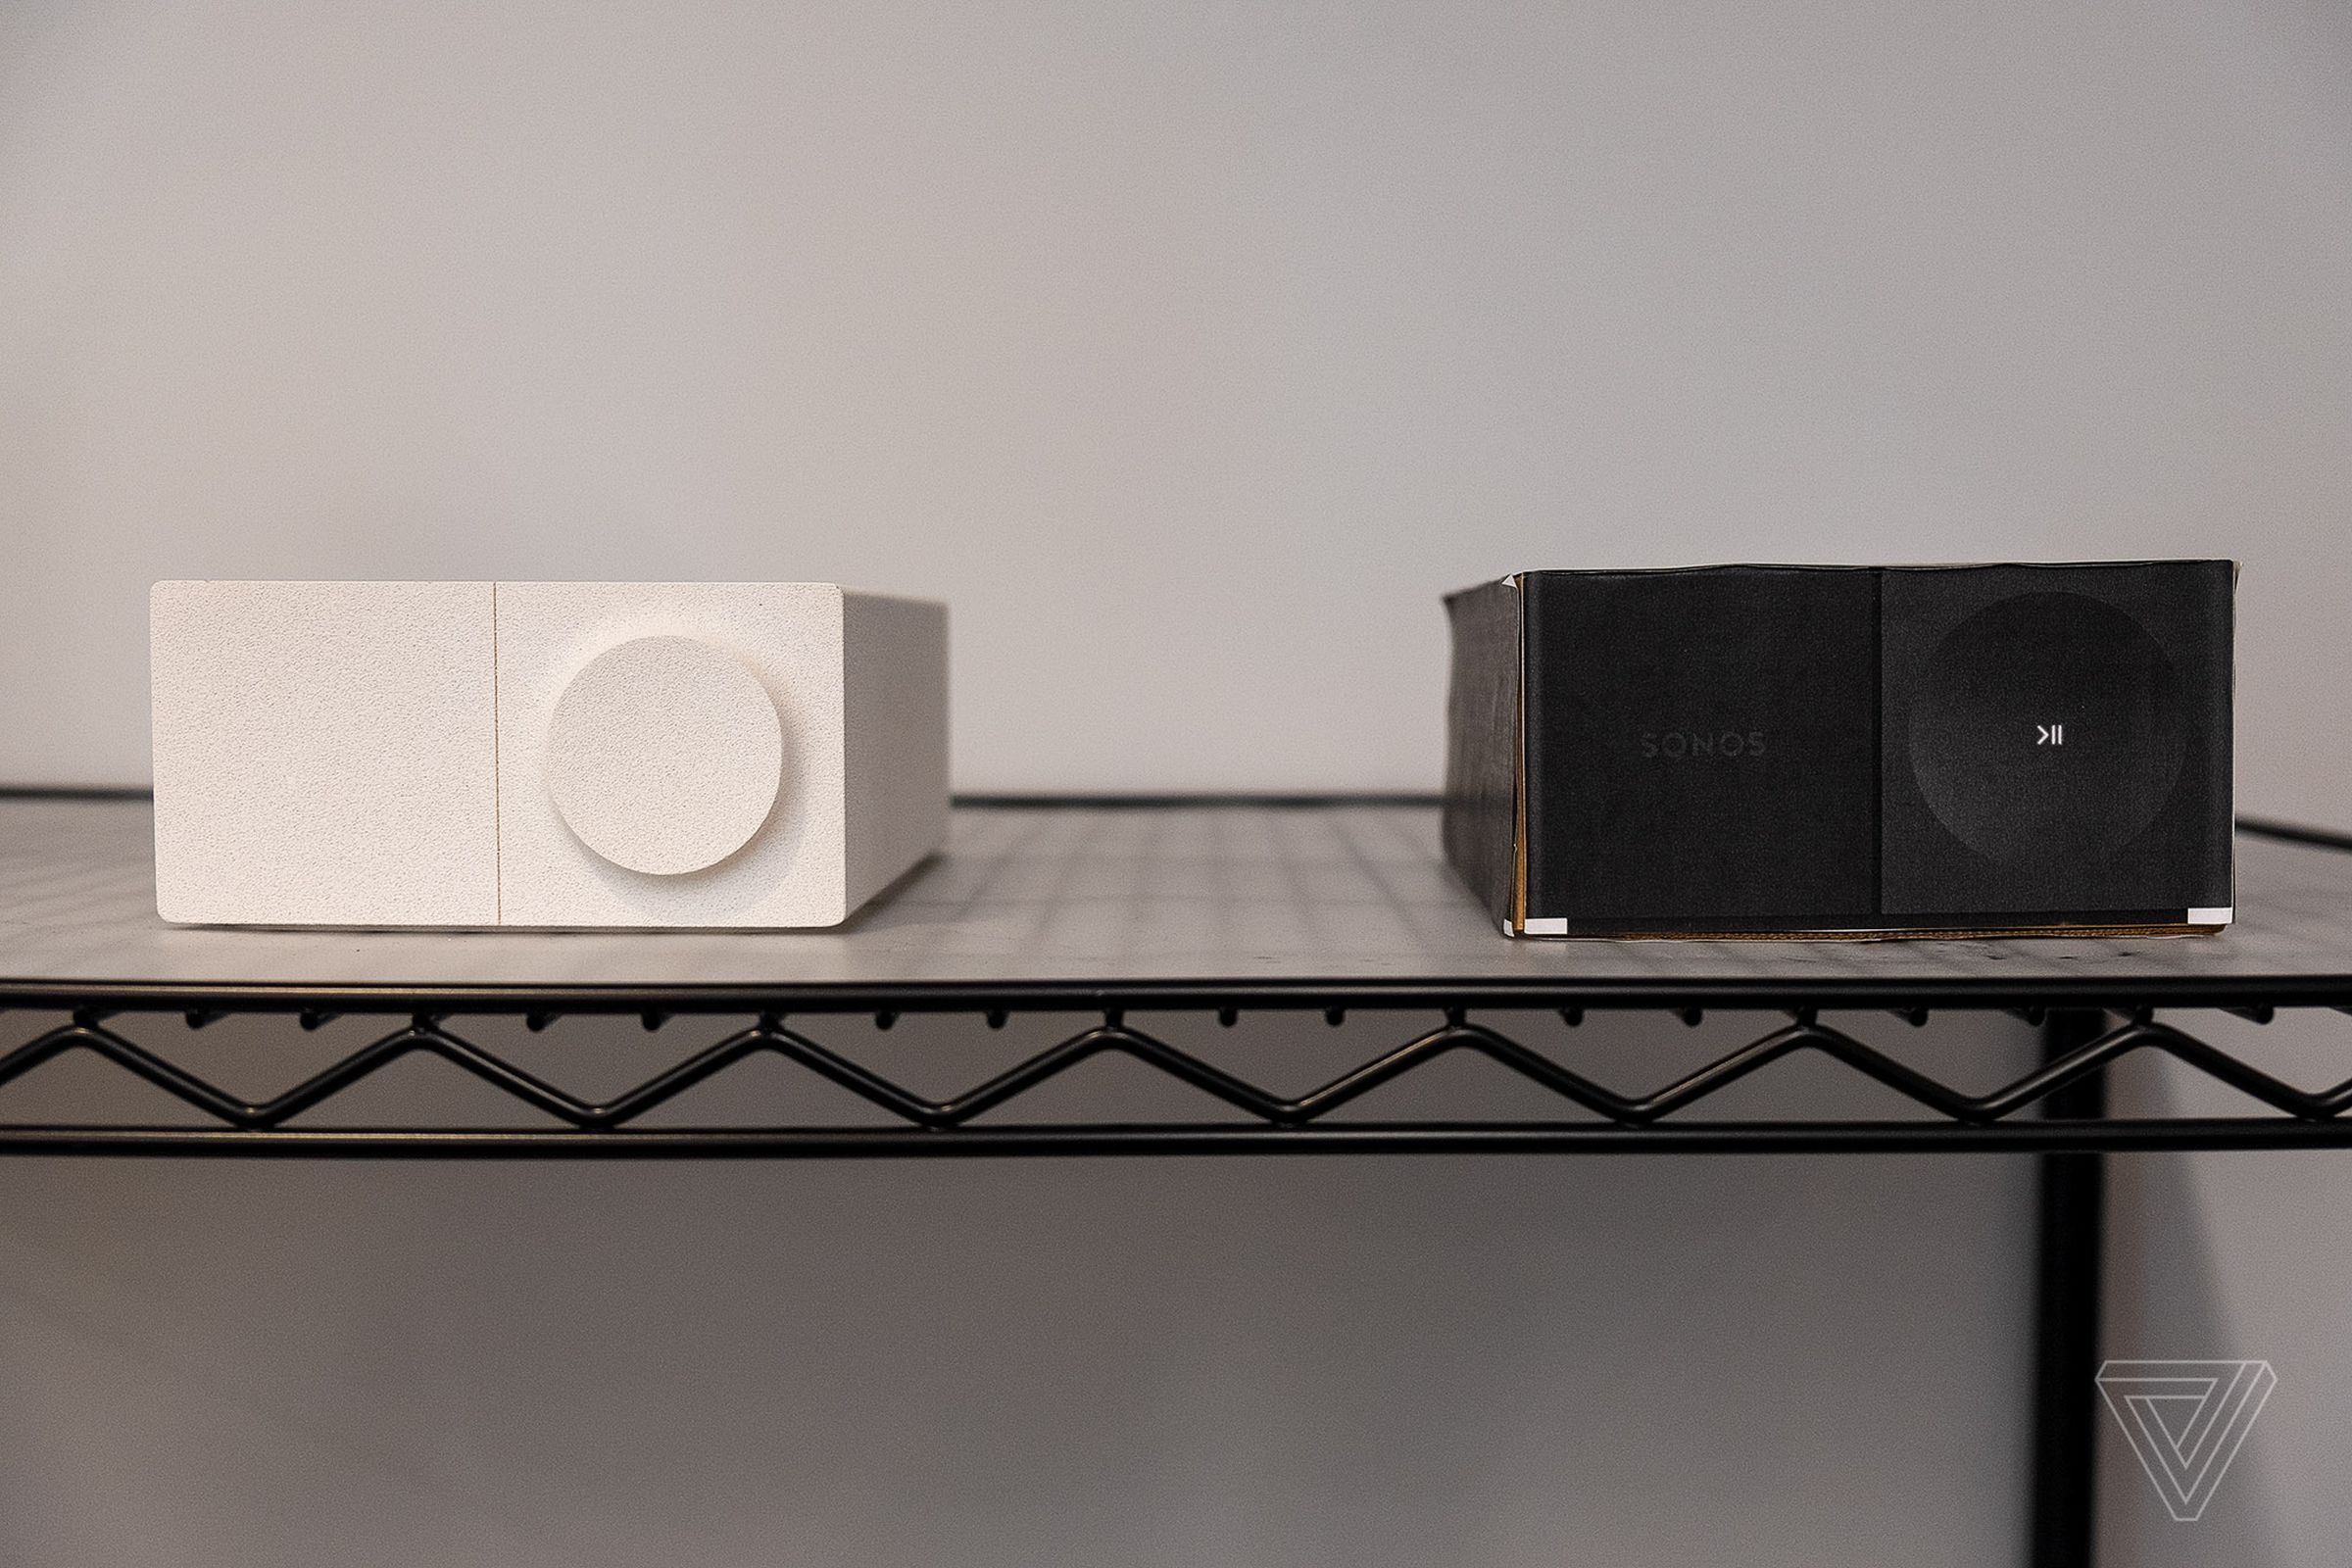 Early prototypes of the Sonos Amp looked much different than the finished product.